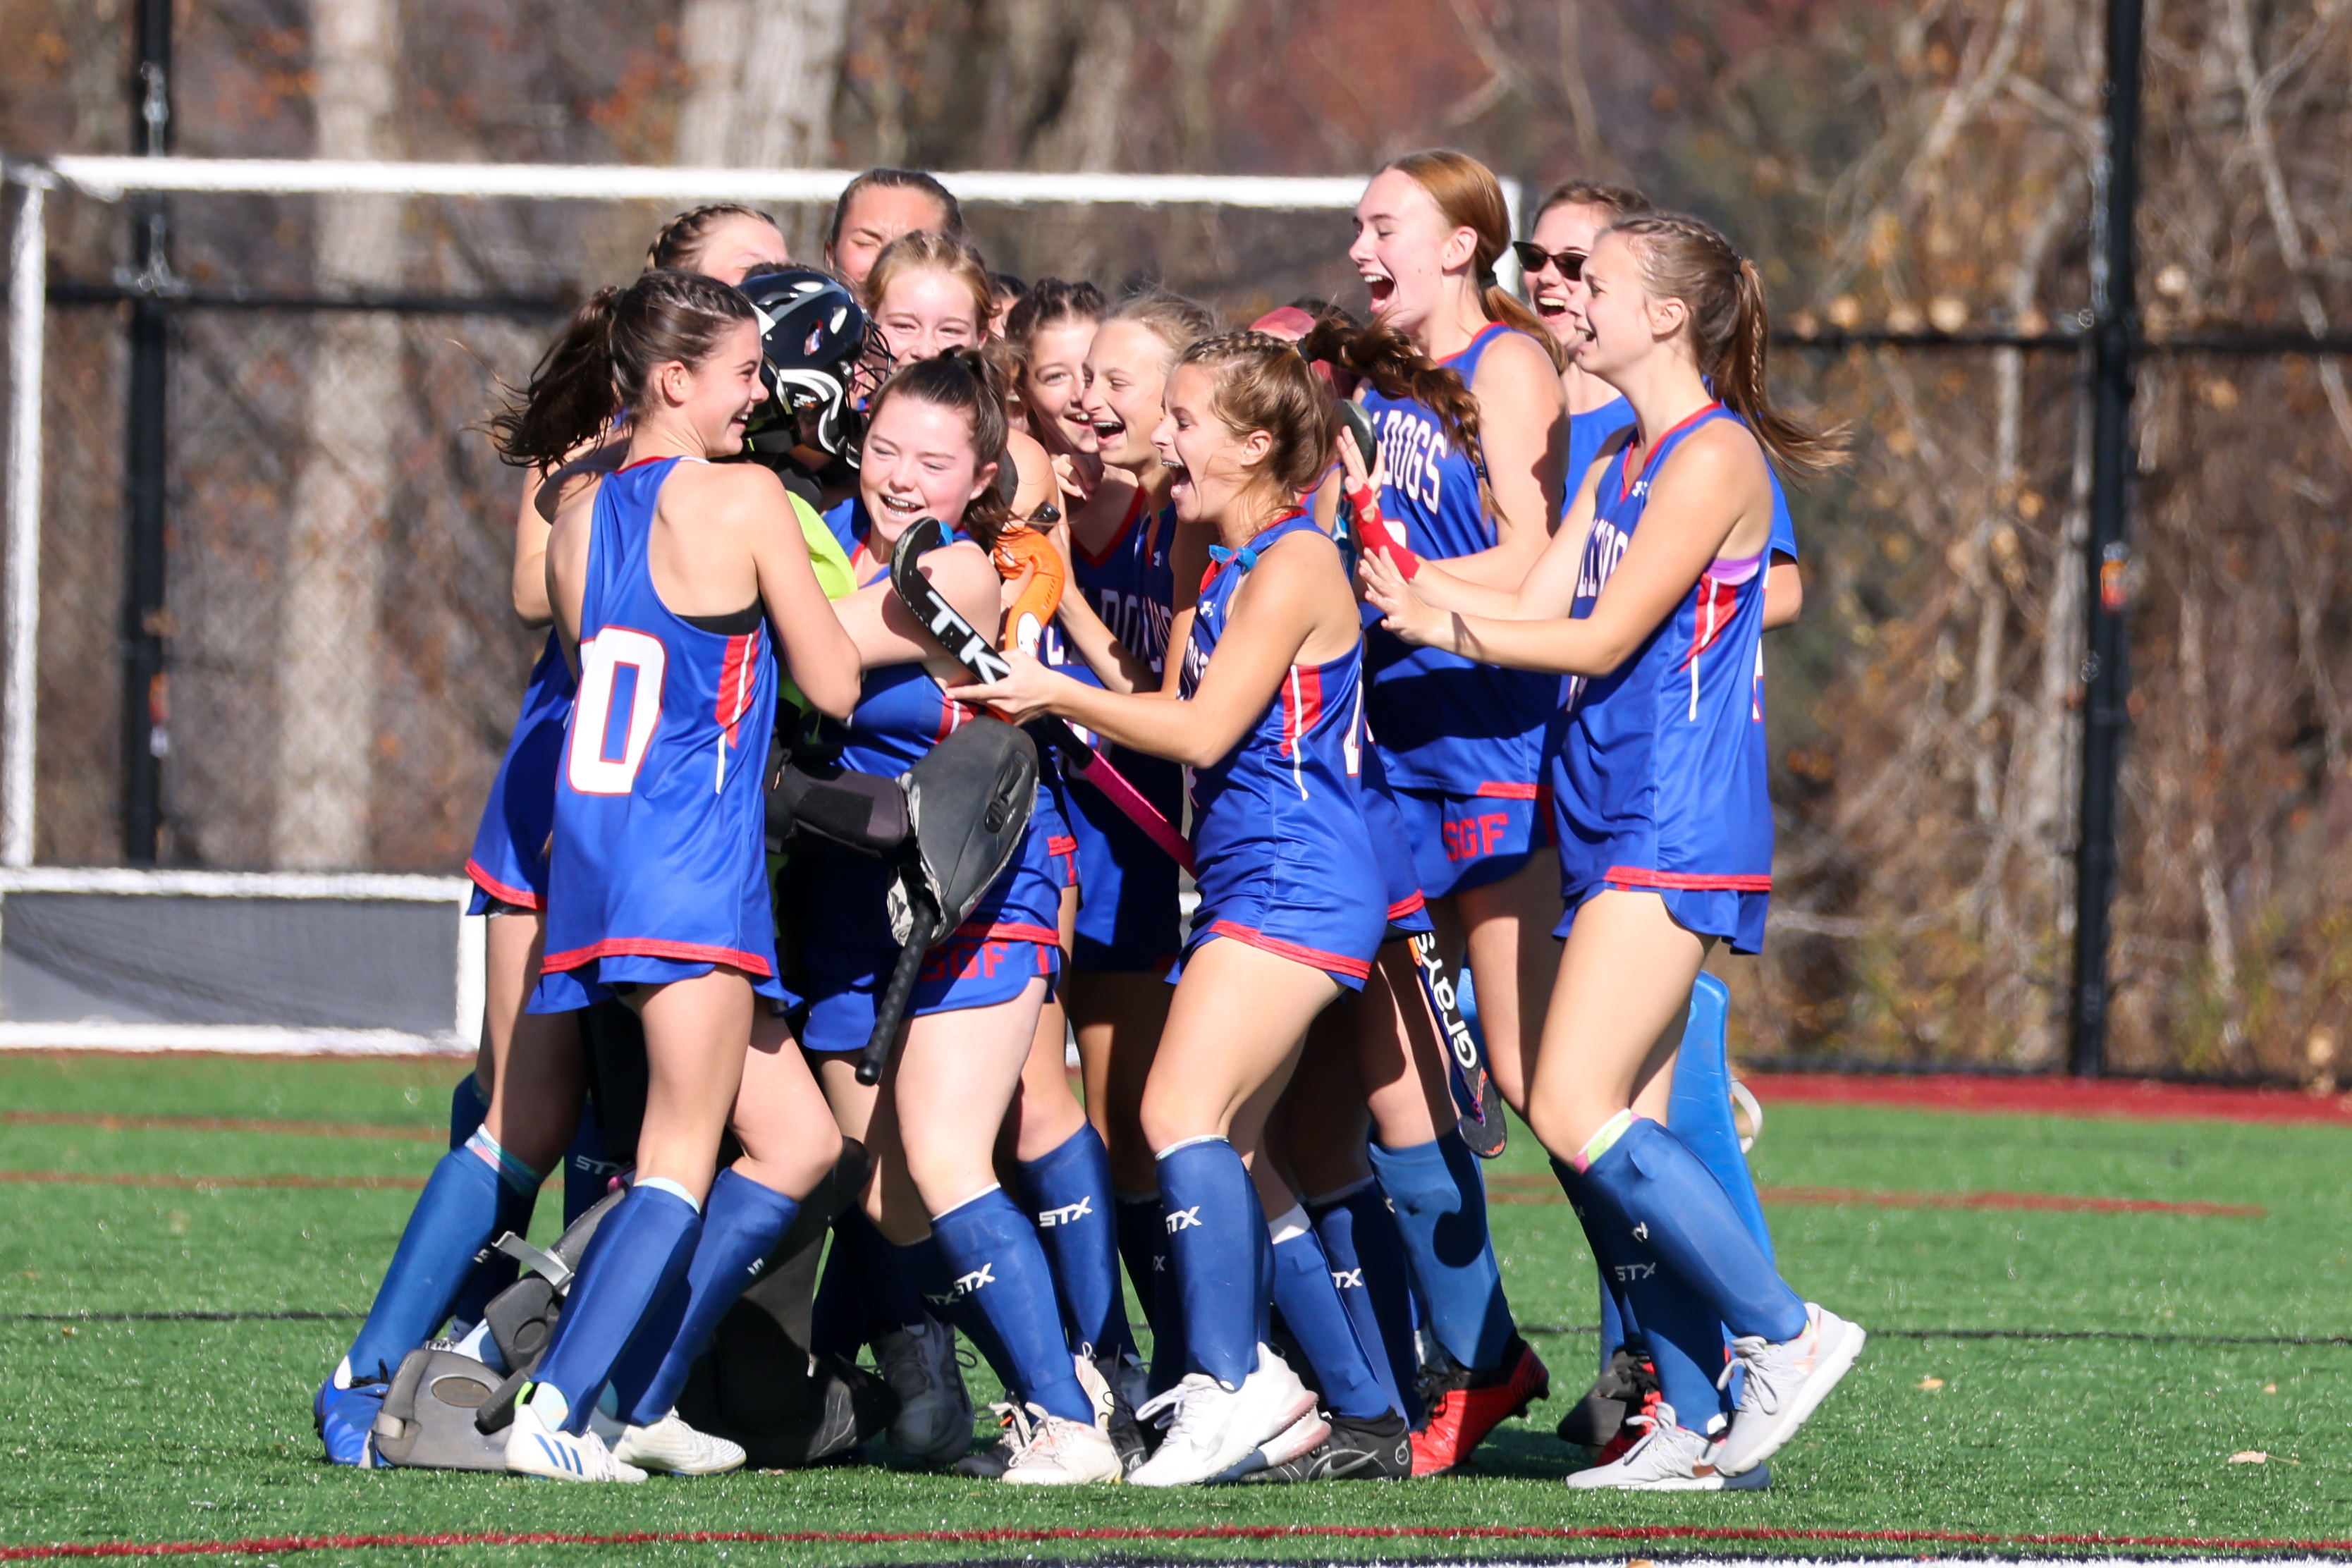 SGF field hockey team embraces and cheers